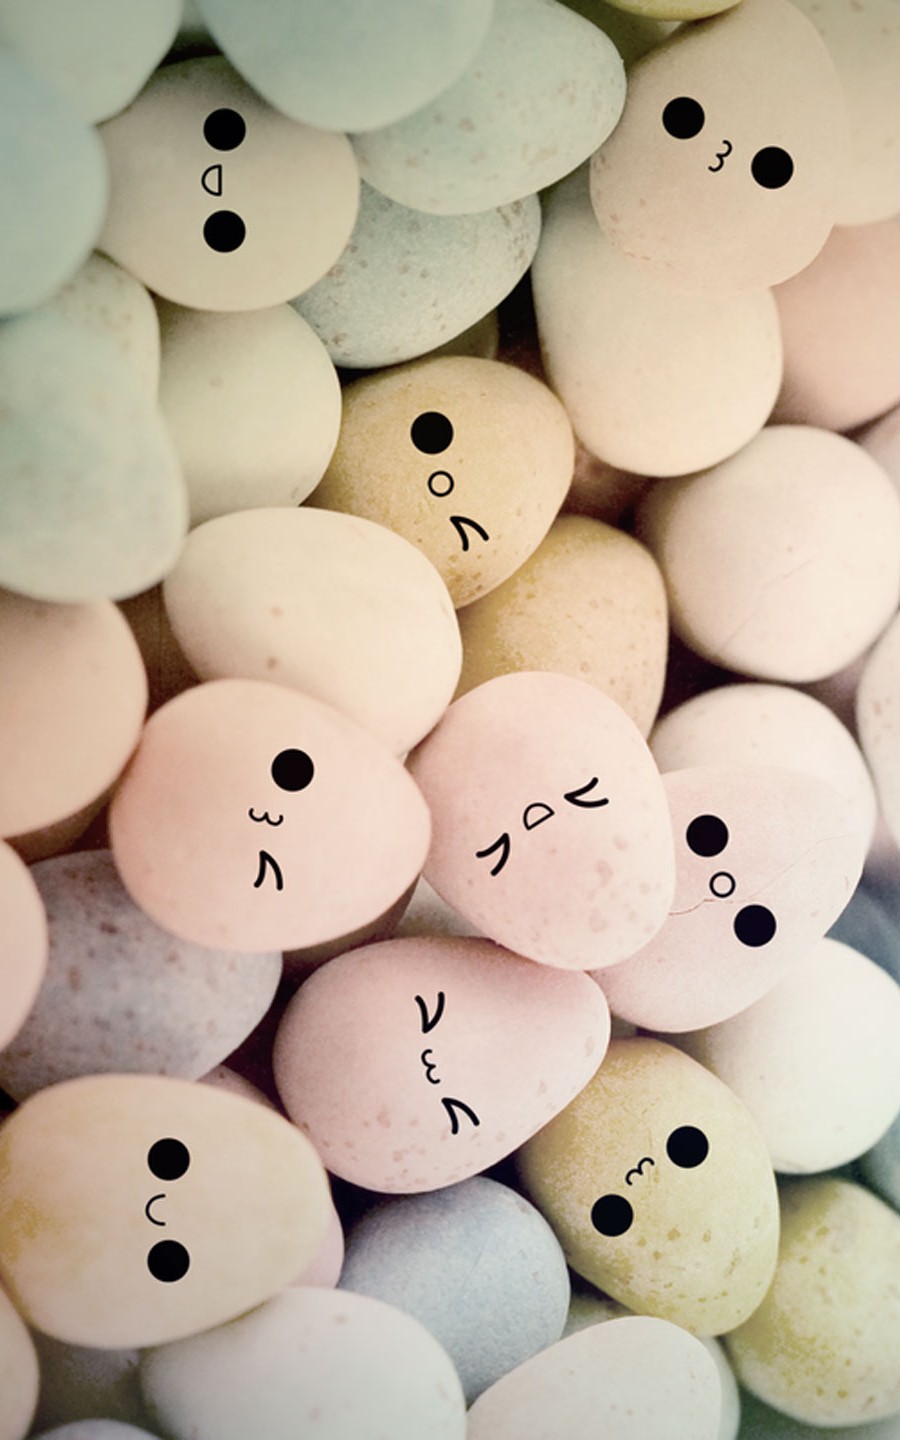 Cute Eggs With Faces iPhone Wallpaper resolution 900x1440